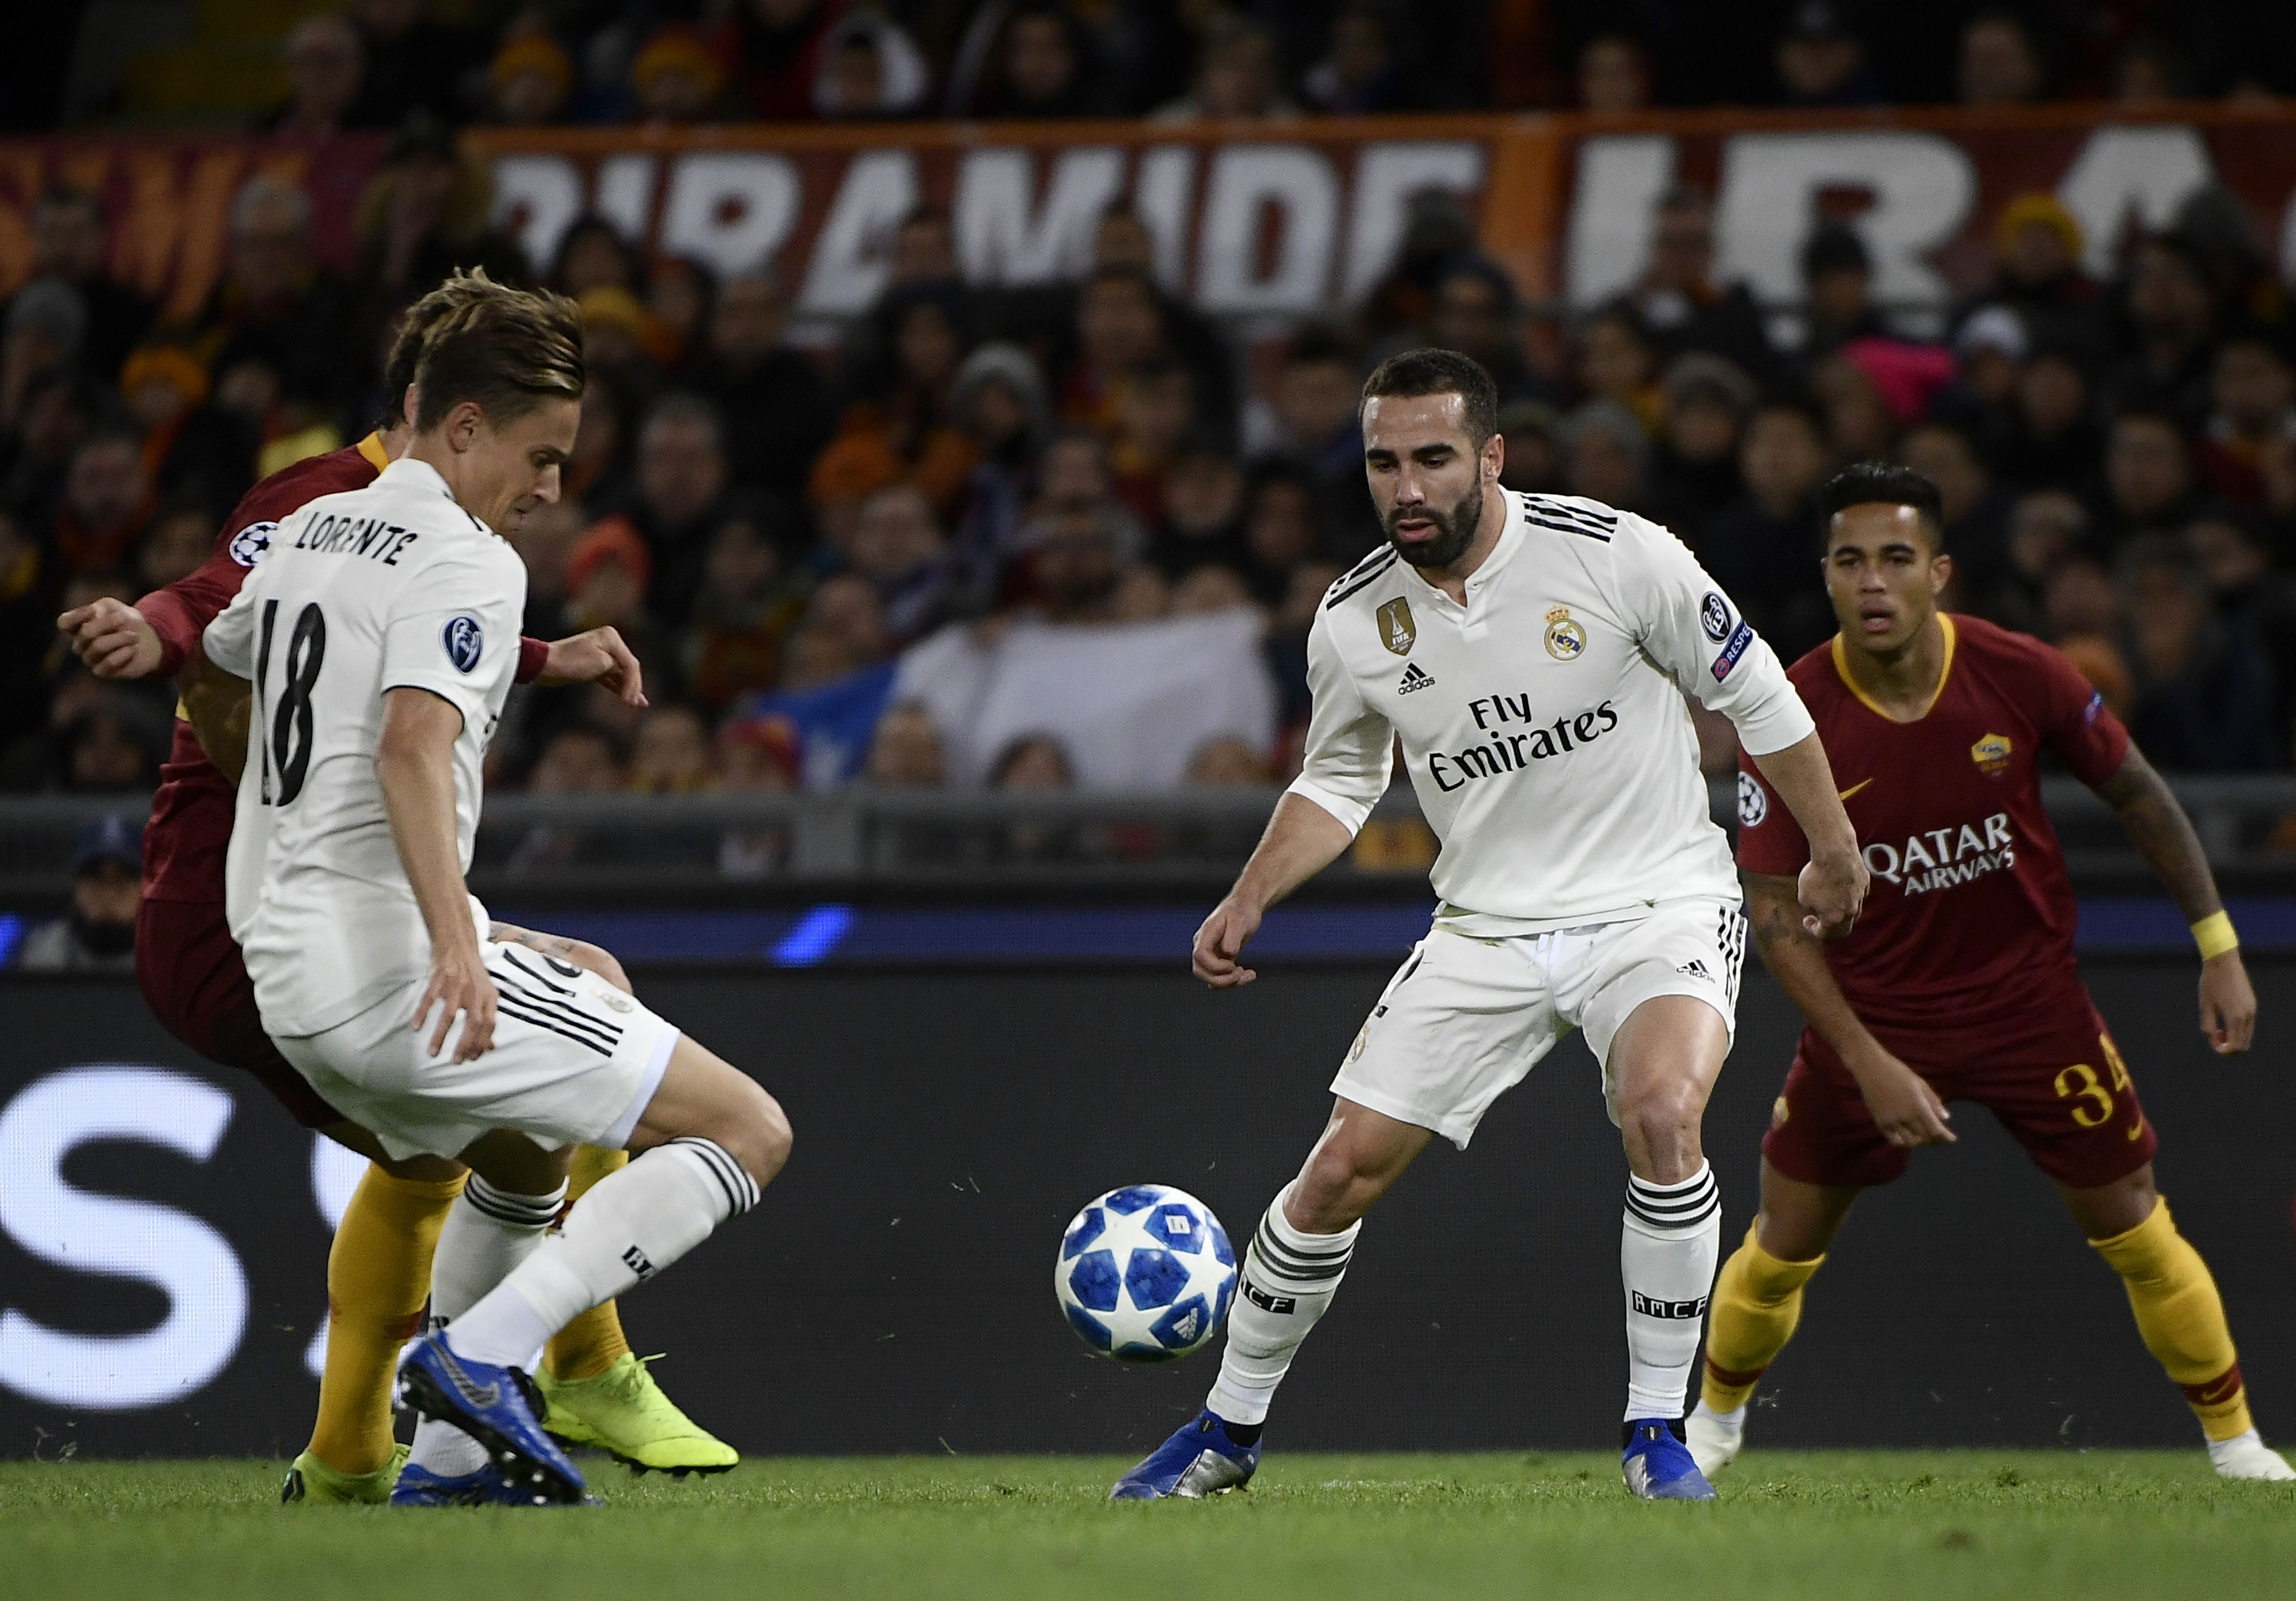 Real Madrid's Spanish miedfieder Marcos Llorente (L) and Real Madrid's Spanish defender Dani Carvajal go for the ball during the UEFA Champions League group G football match AS Rome vs Real Madrid on November 27, 2018 at the Olympic stadium in Rome. (Photo by Filippo MONTEFORTE / AFP)        (Photo credit should read FILIPPO MONTEFORTE/AFP/Getty Images)